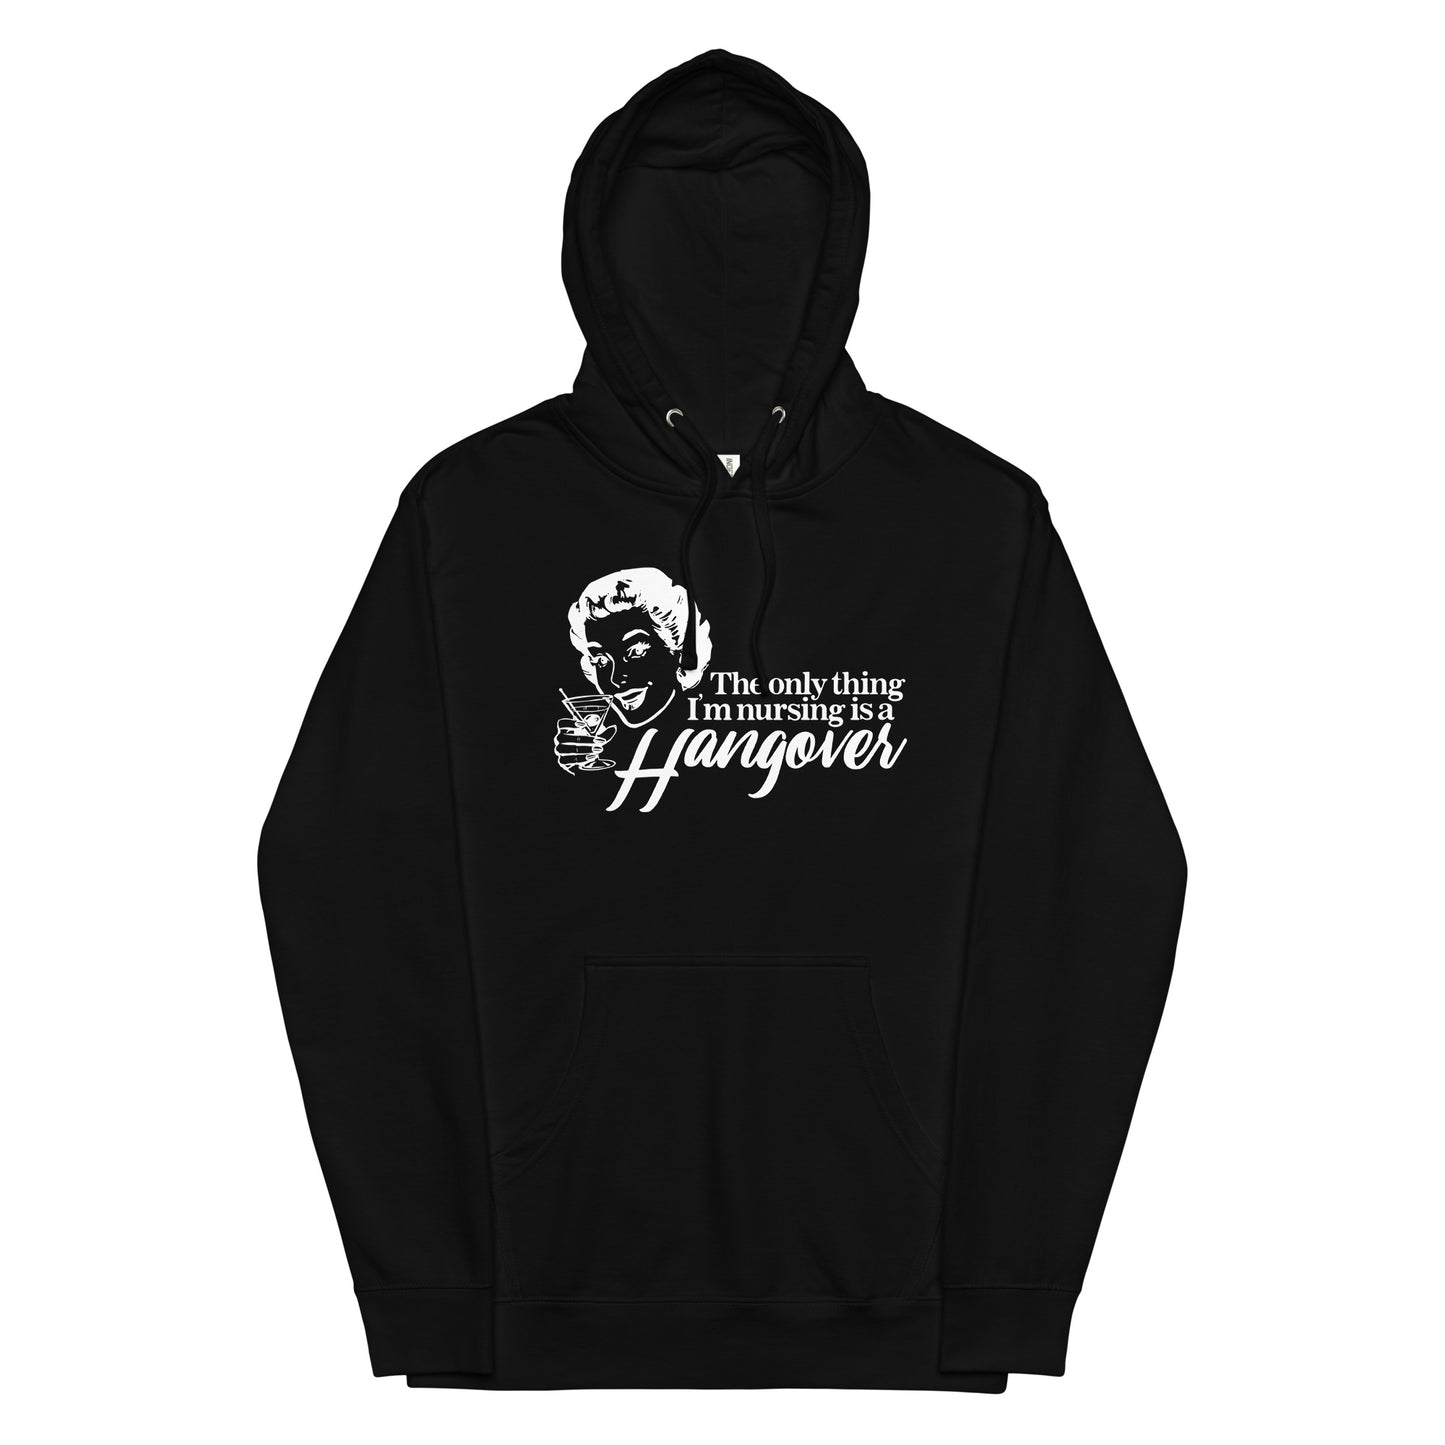 The Only Thing I'm Nursing is a Hangover Unisex hoodie